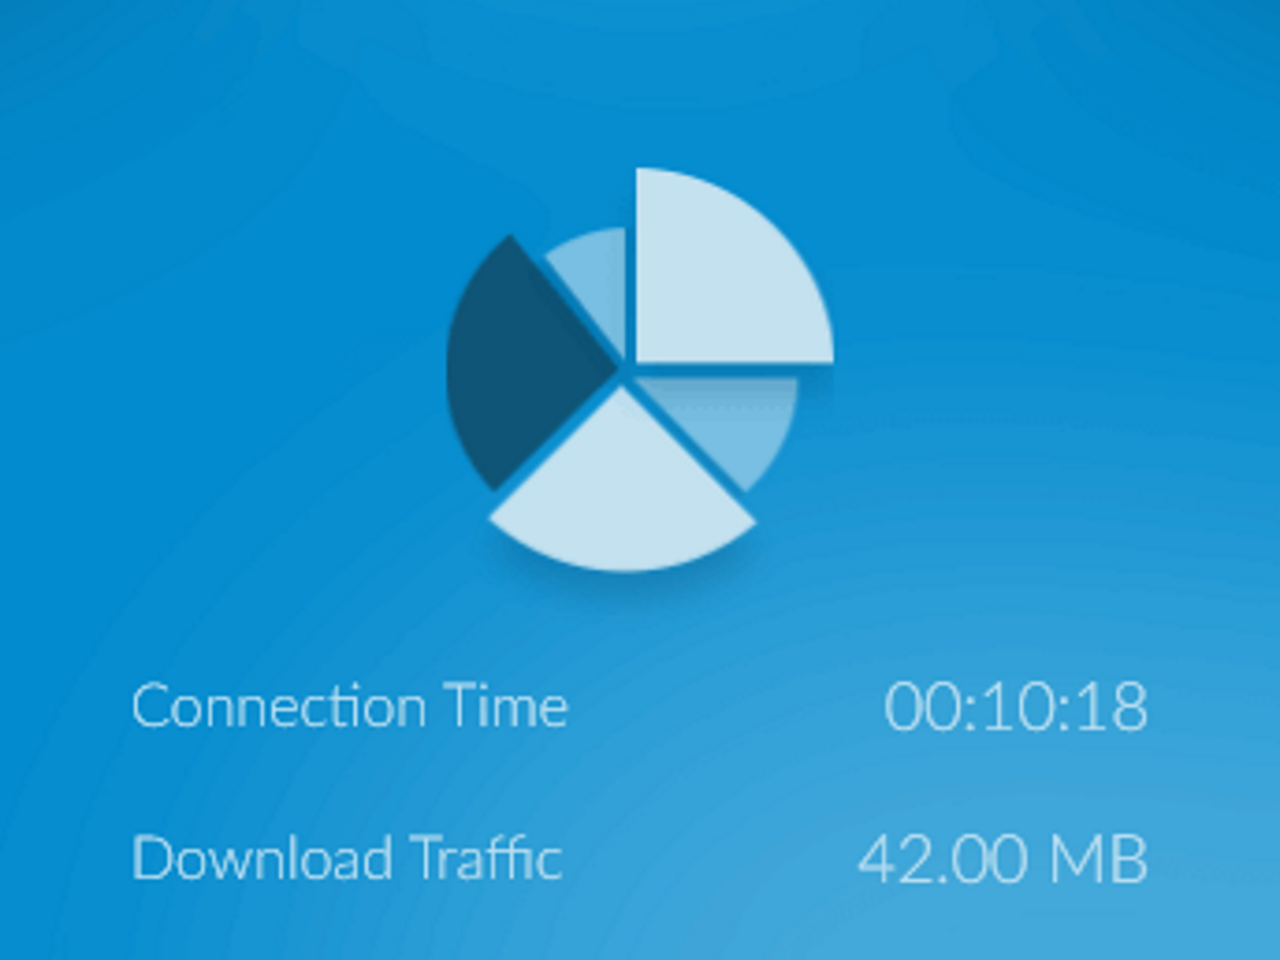 ZenMate’s connection and traffic monitoring statistics